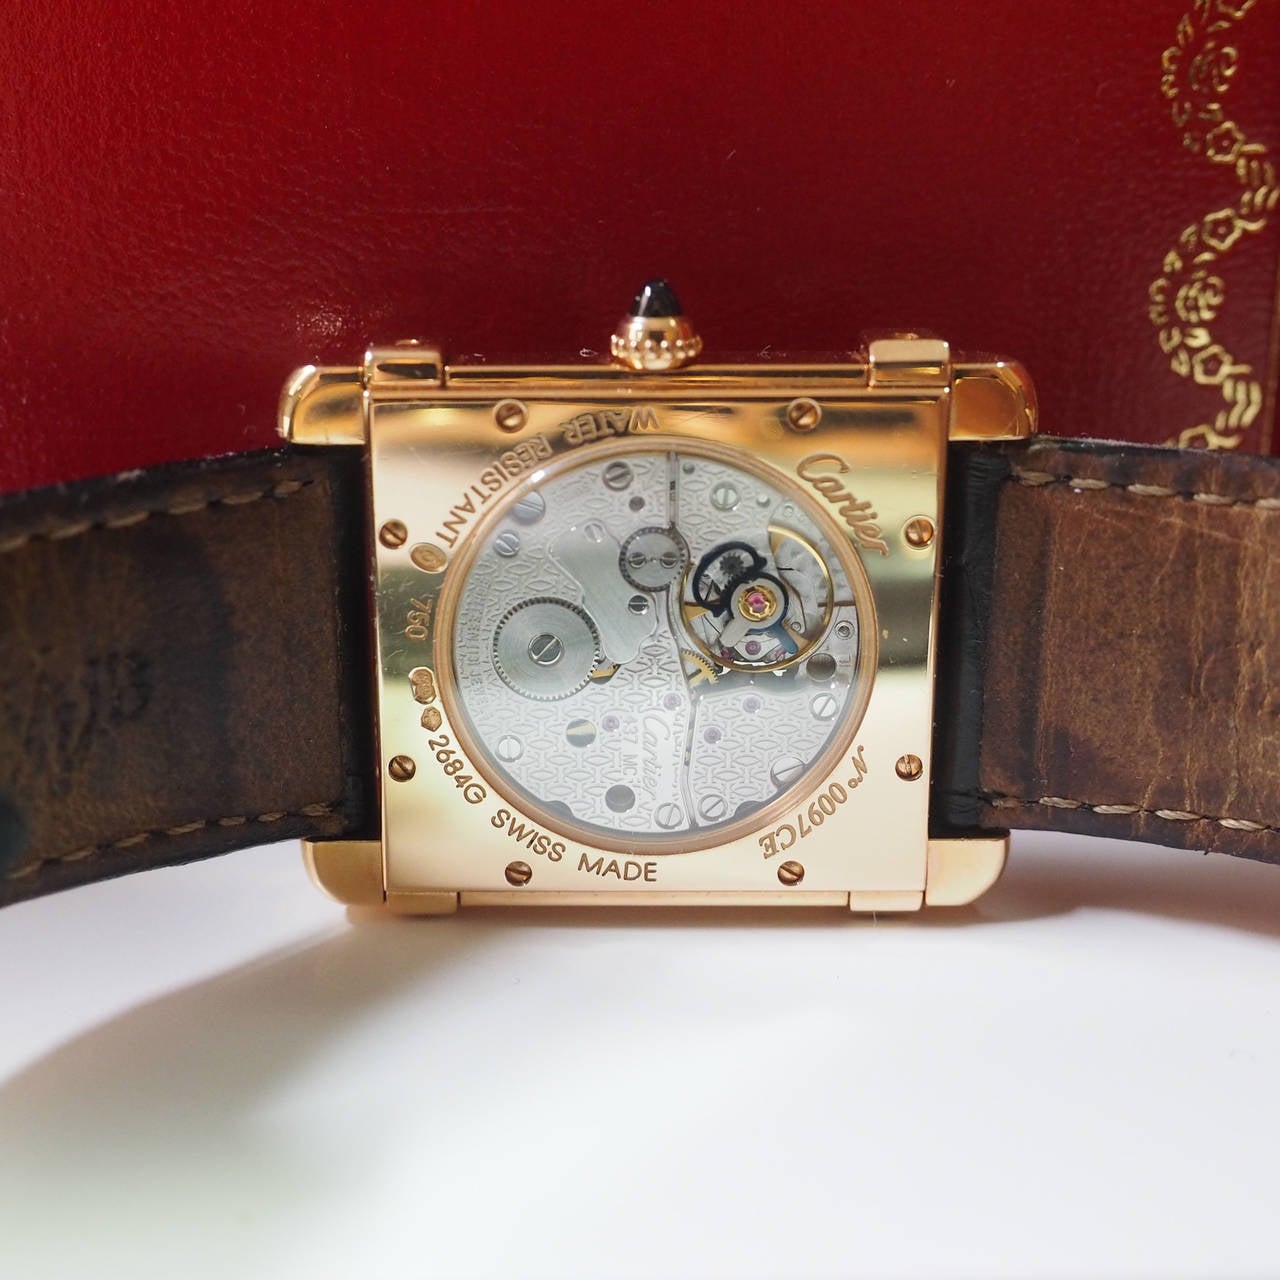 Cartier Rose Gold Chinoise Wristwatch Ref W1542451 In Excellent Condition For Sale In Bologna, IT